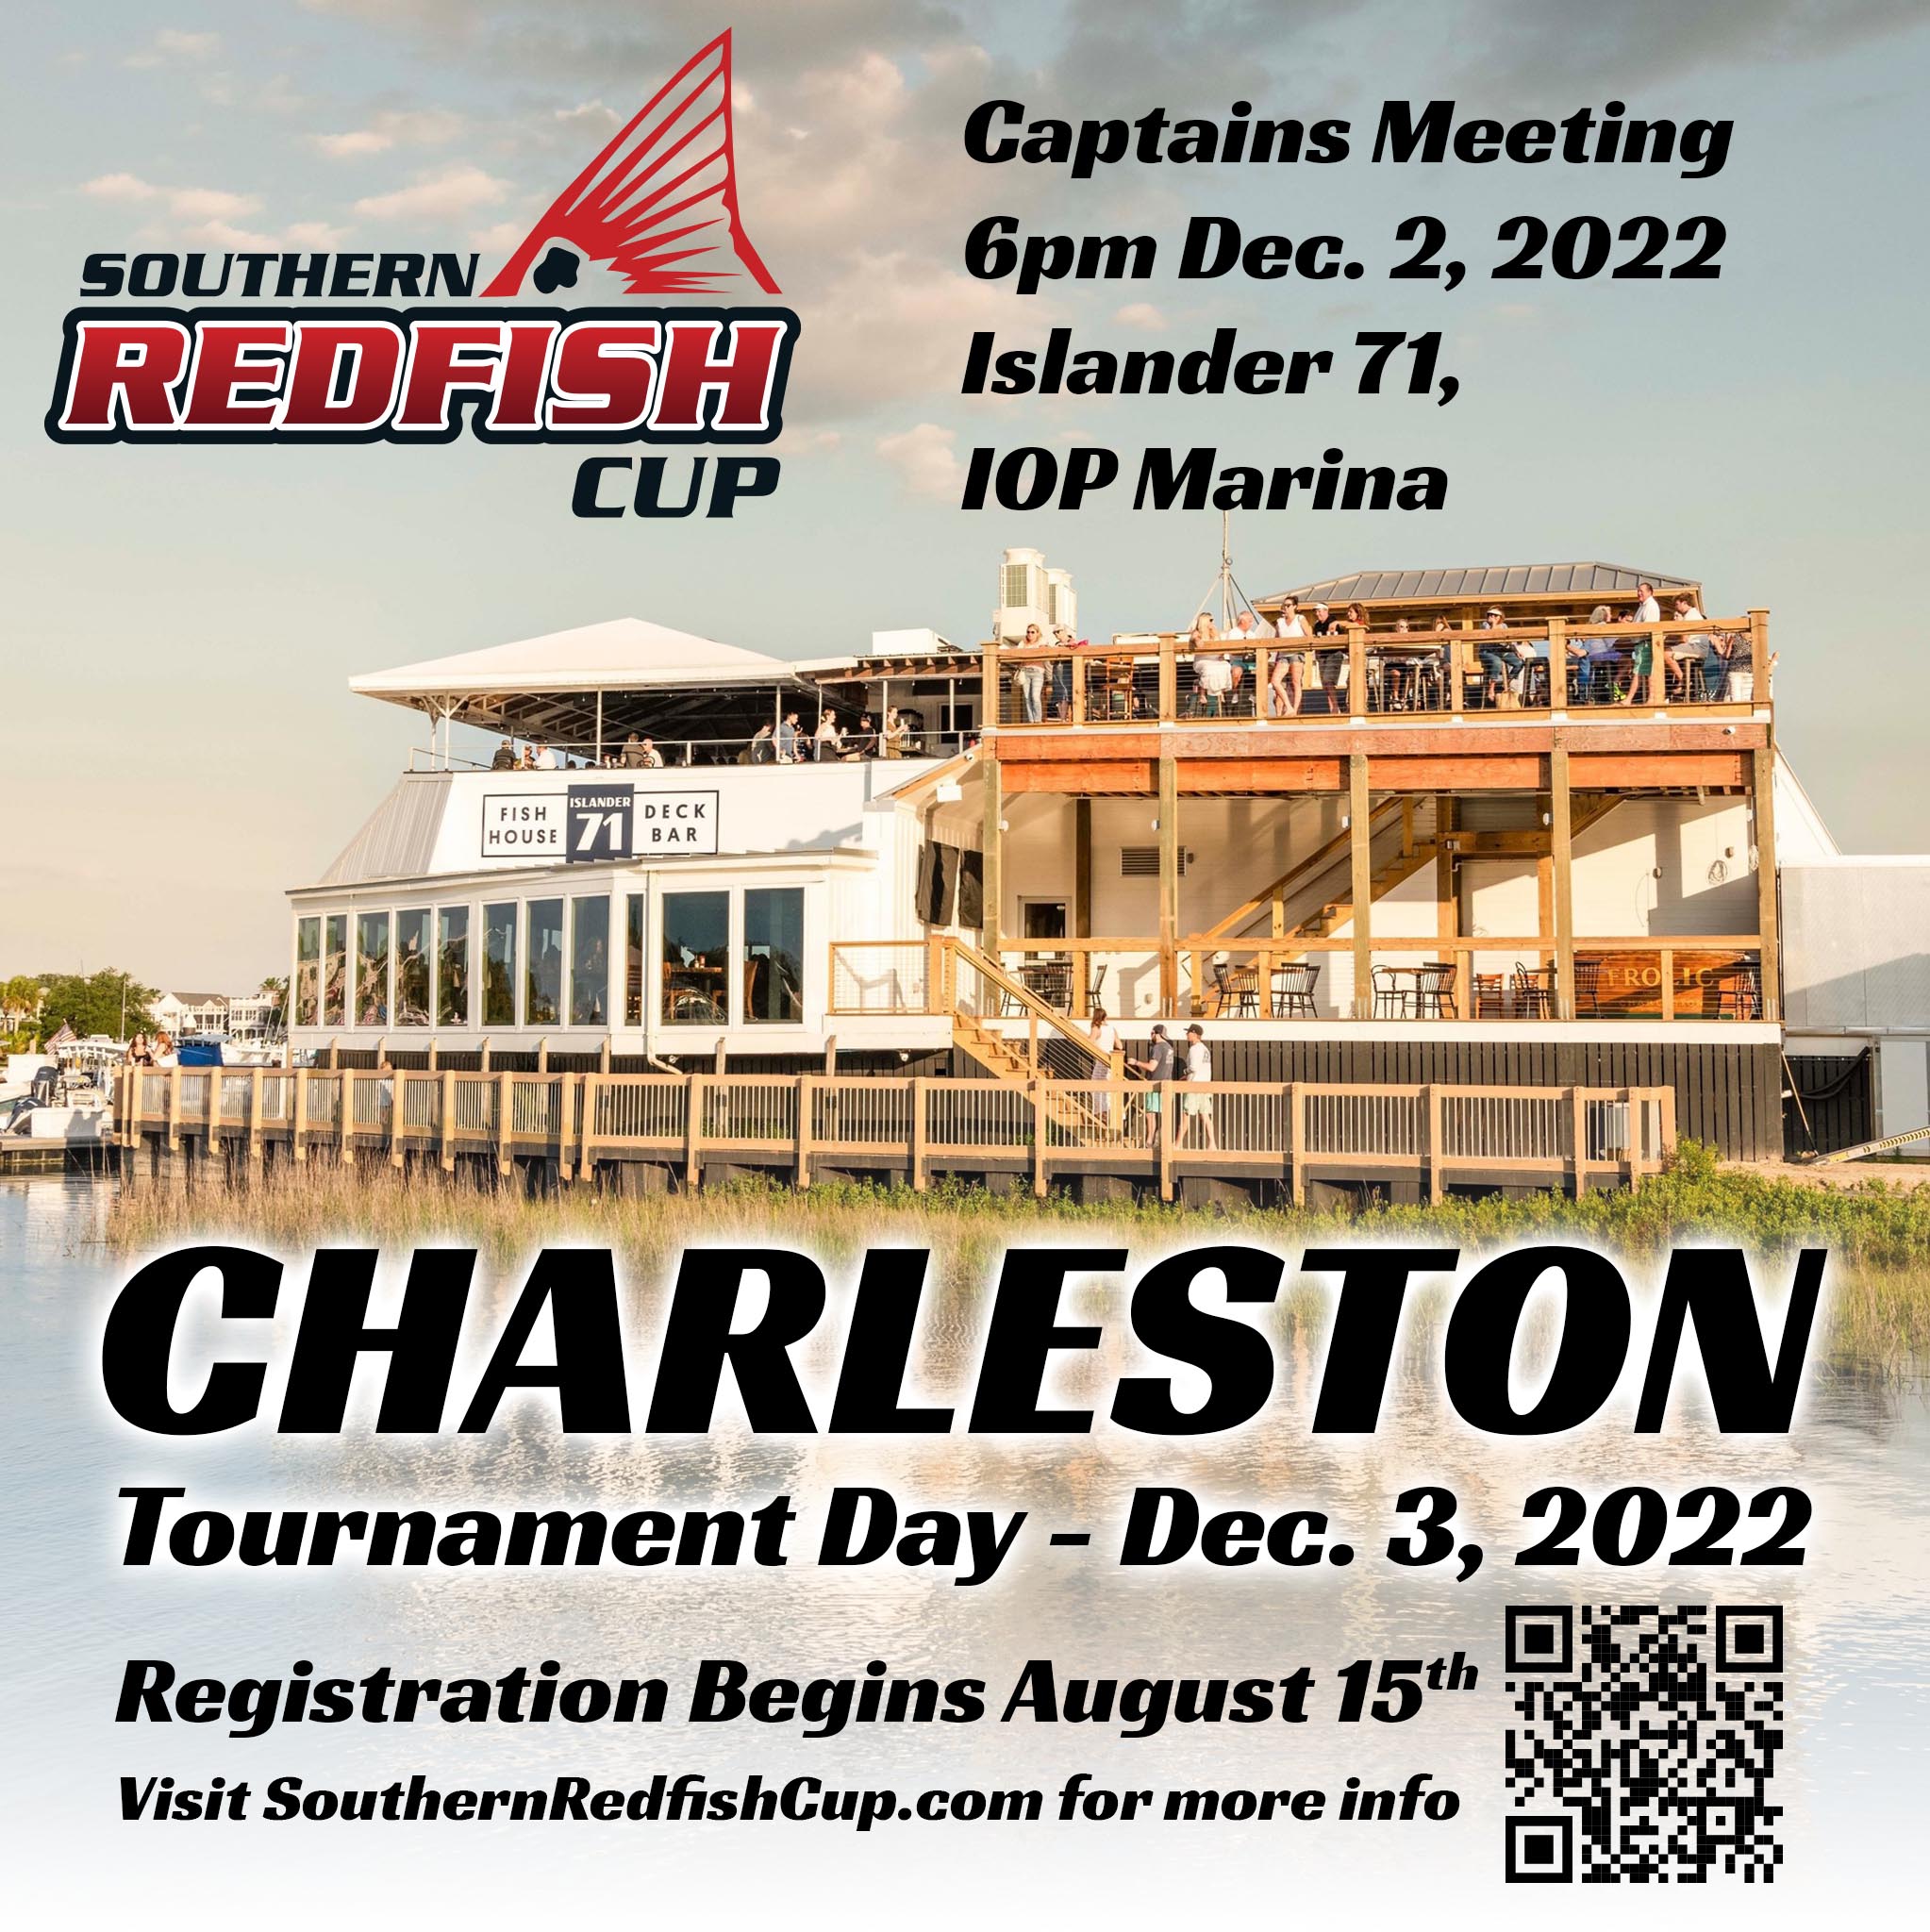 Southern Redfish Cup